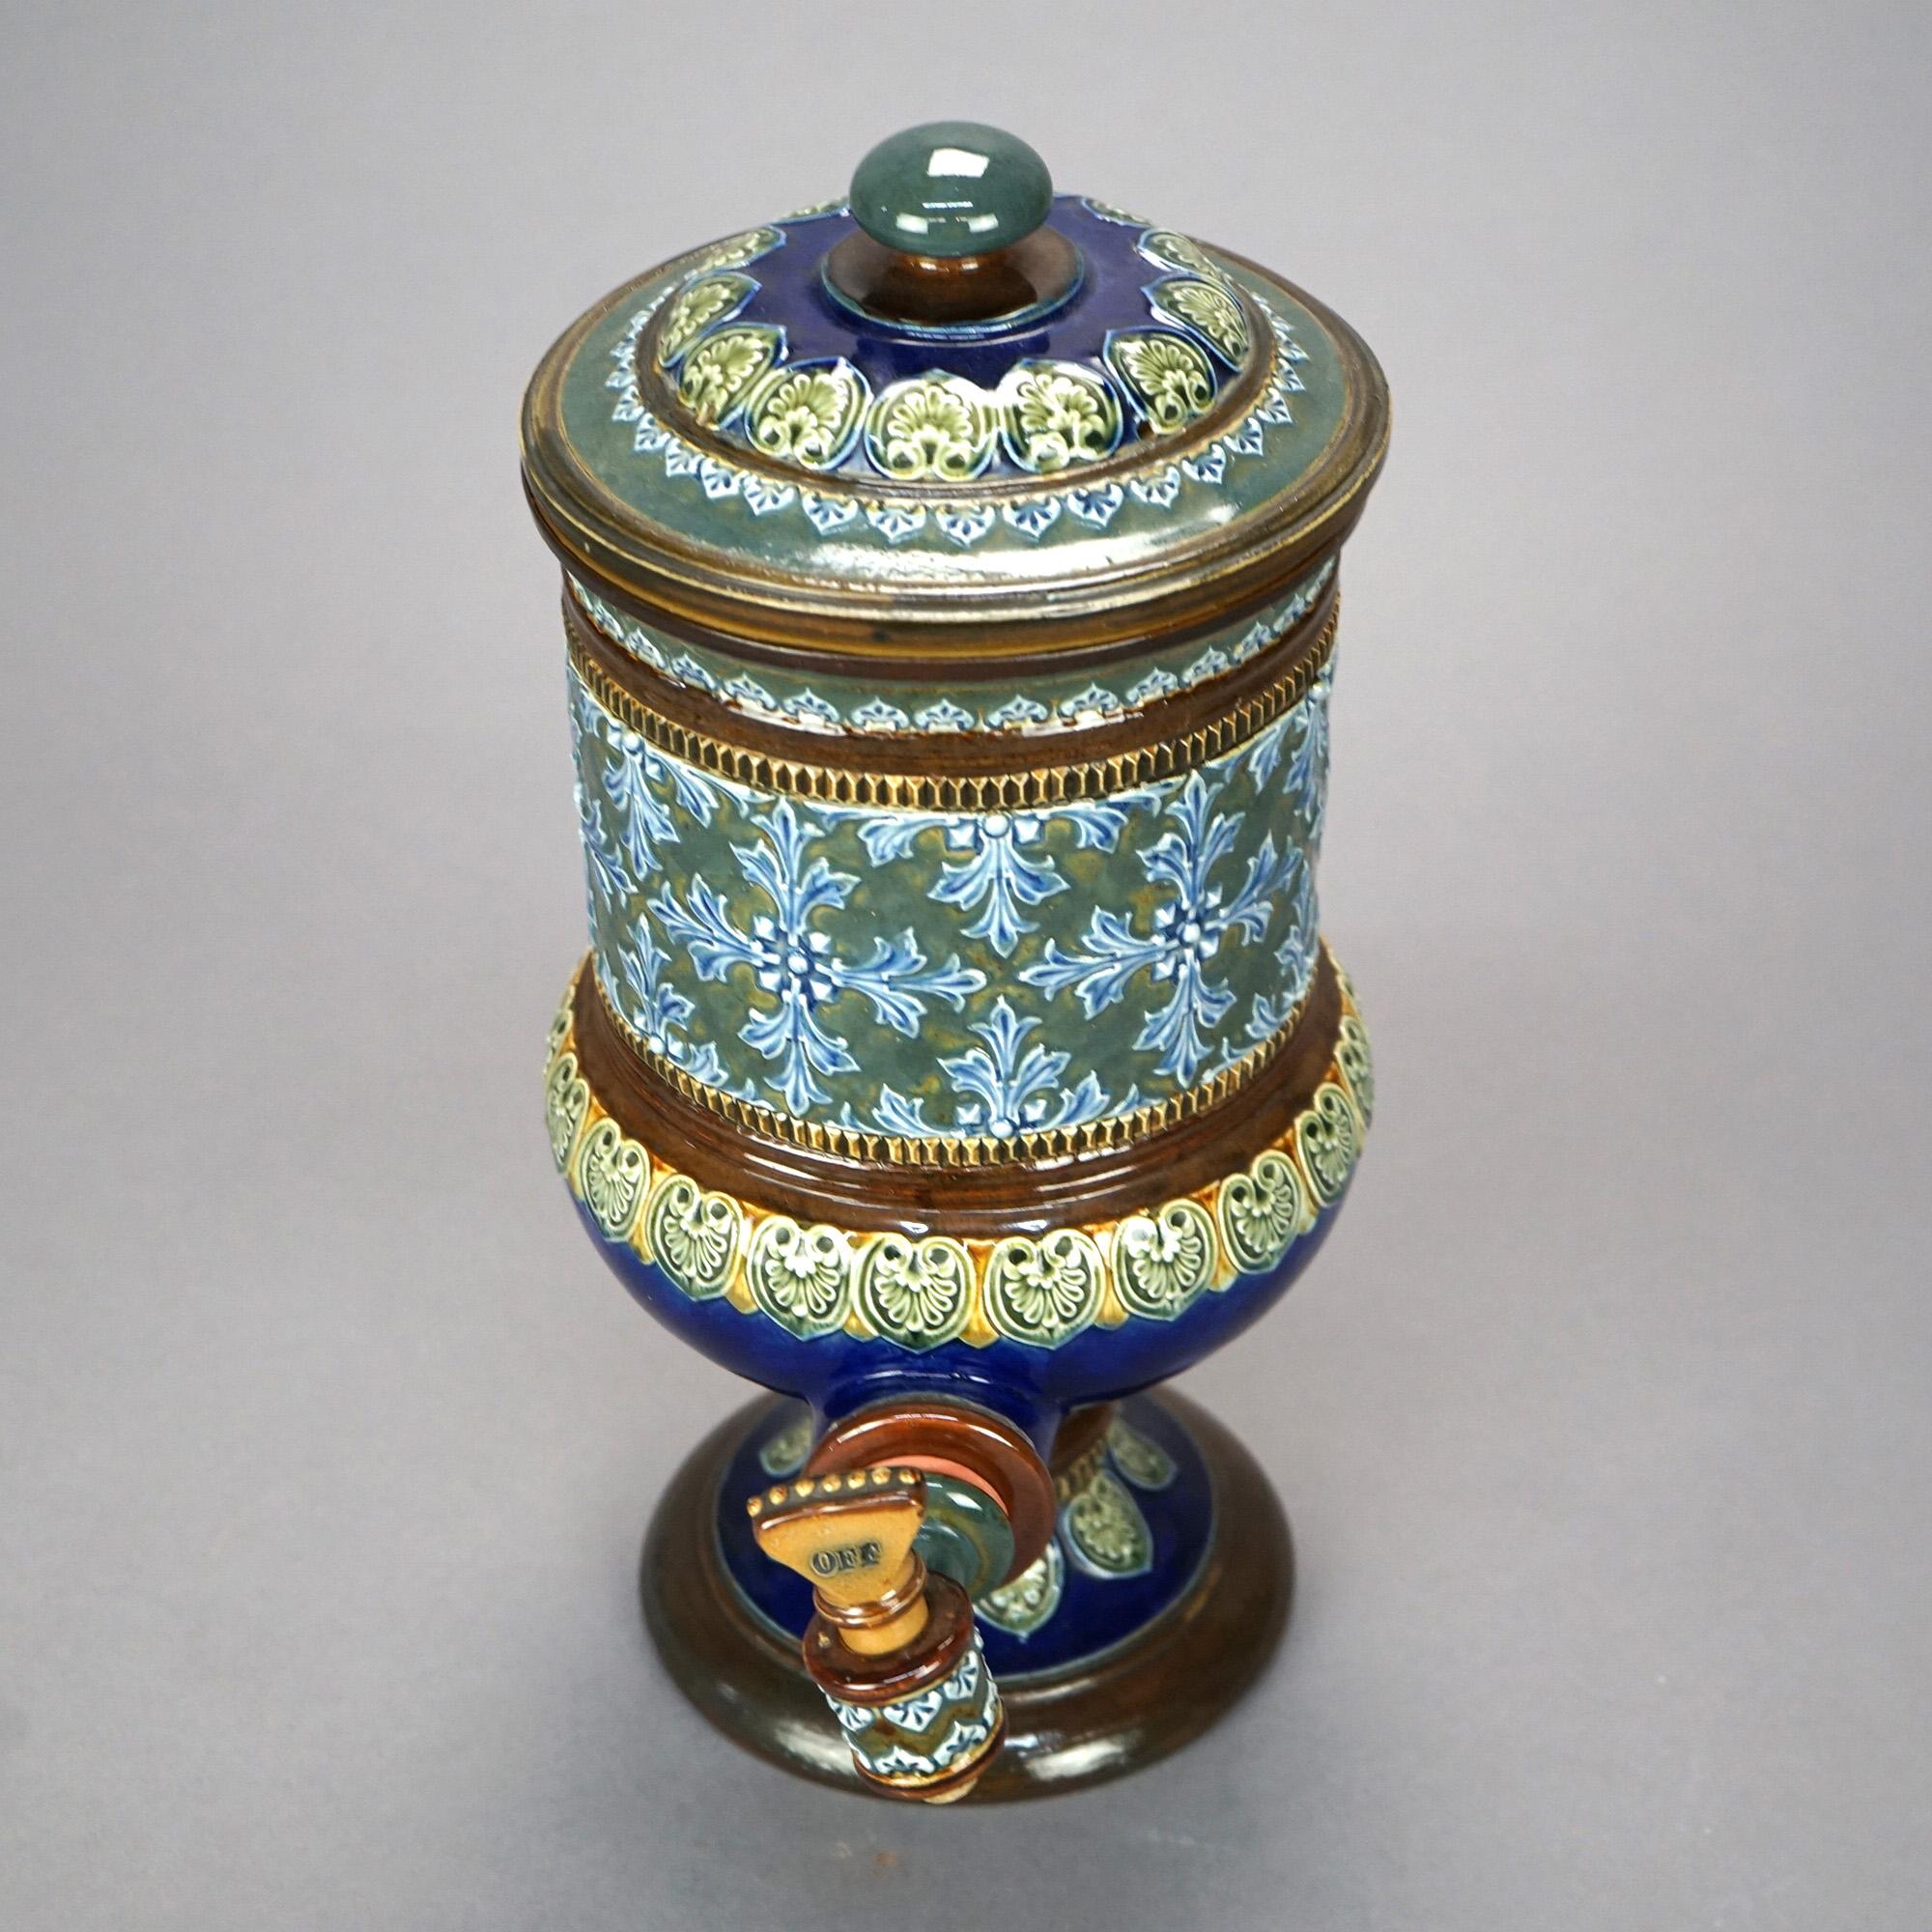 An antique English beverage dispenser by Royal Doulton offers pottery construction with polychrome glazed exterior, raised on pedestal base, circa 1890

Measures- 14''H x 6.75''W x 9.25''D.